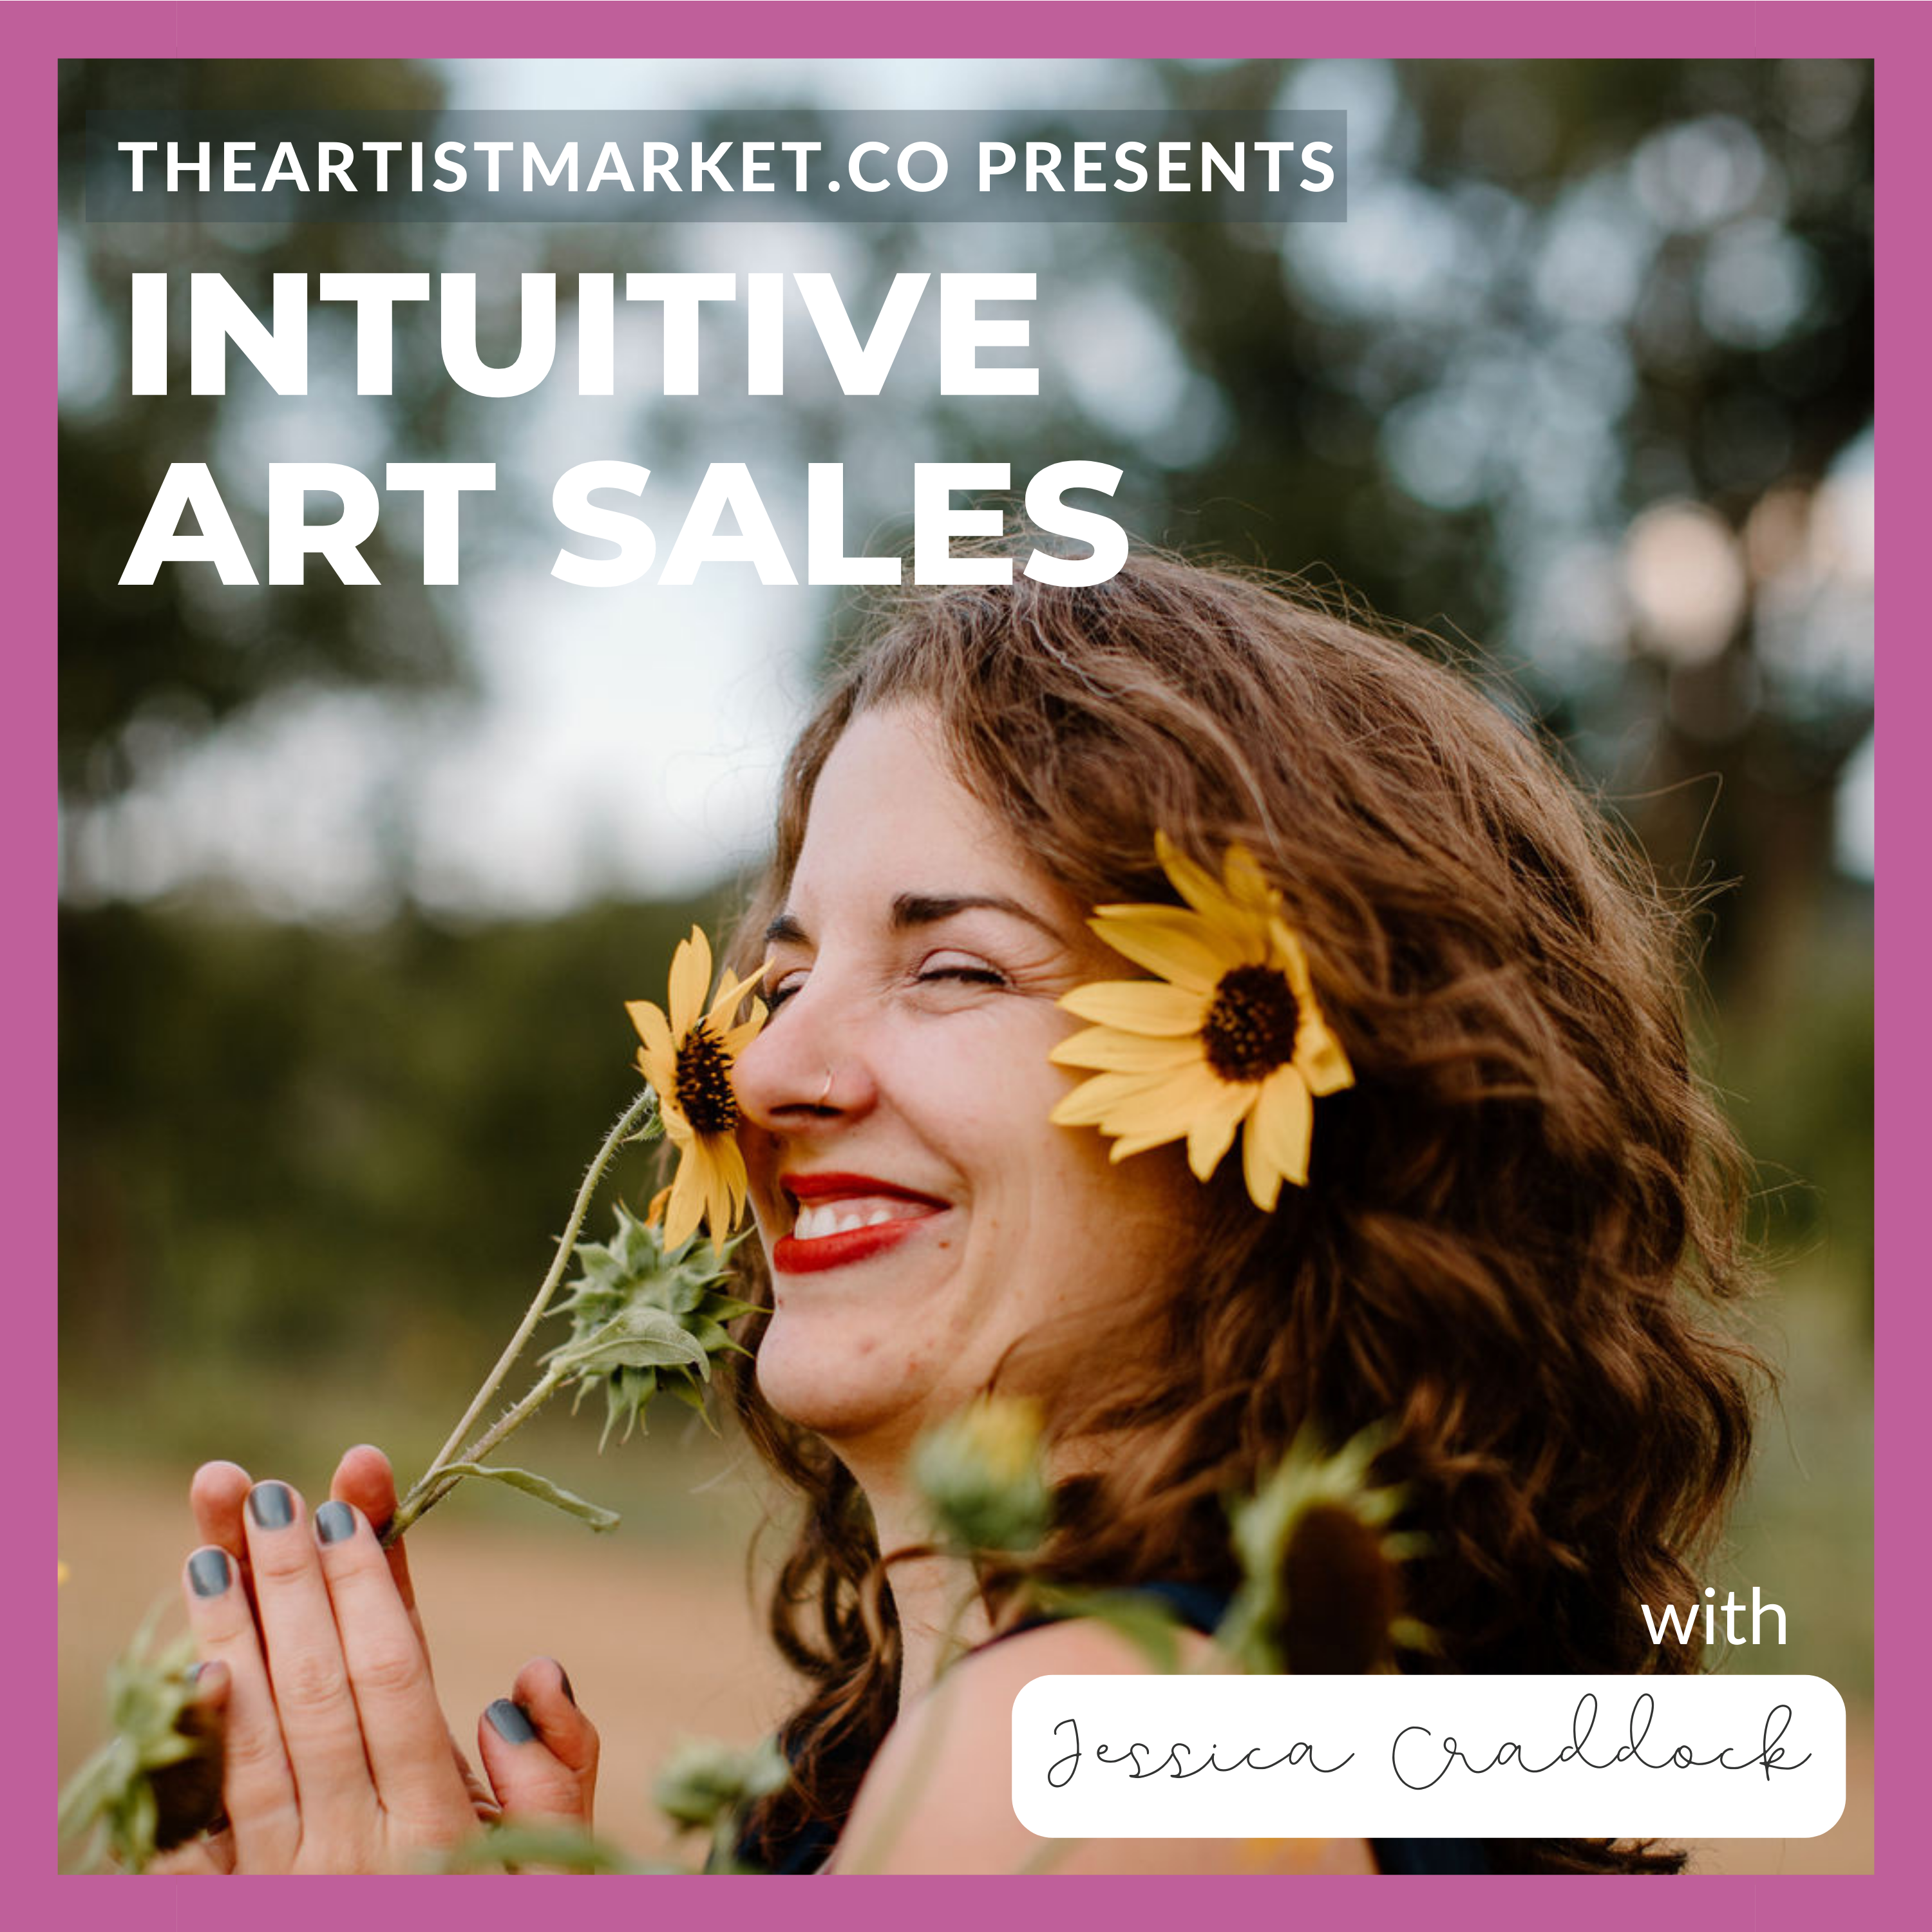 "As a hobby artist, how do I attract buyers to increase sales?" - Kristine Hurd E74